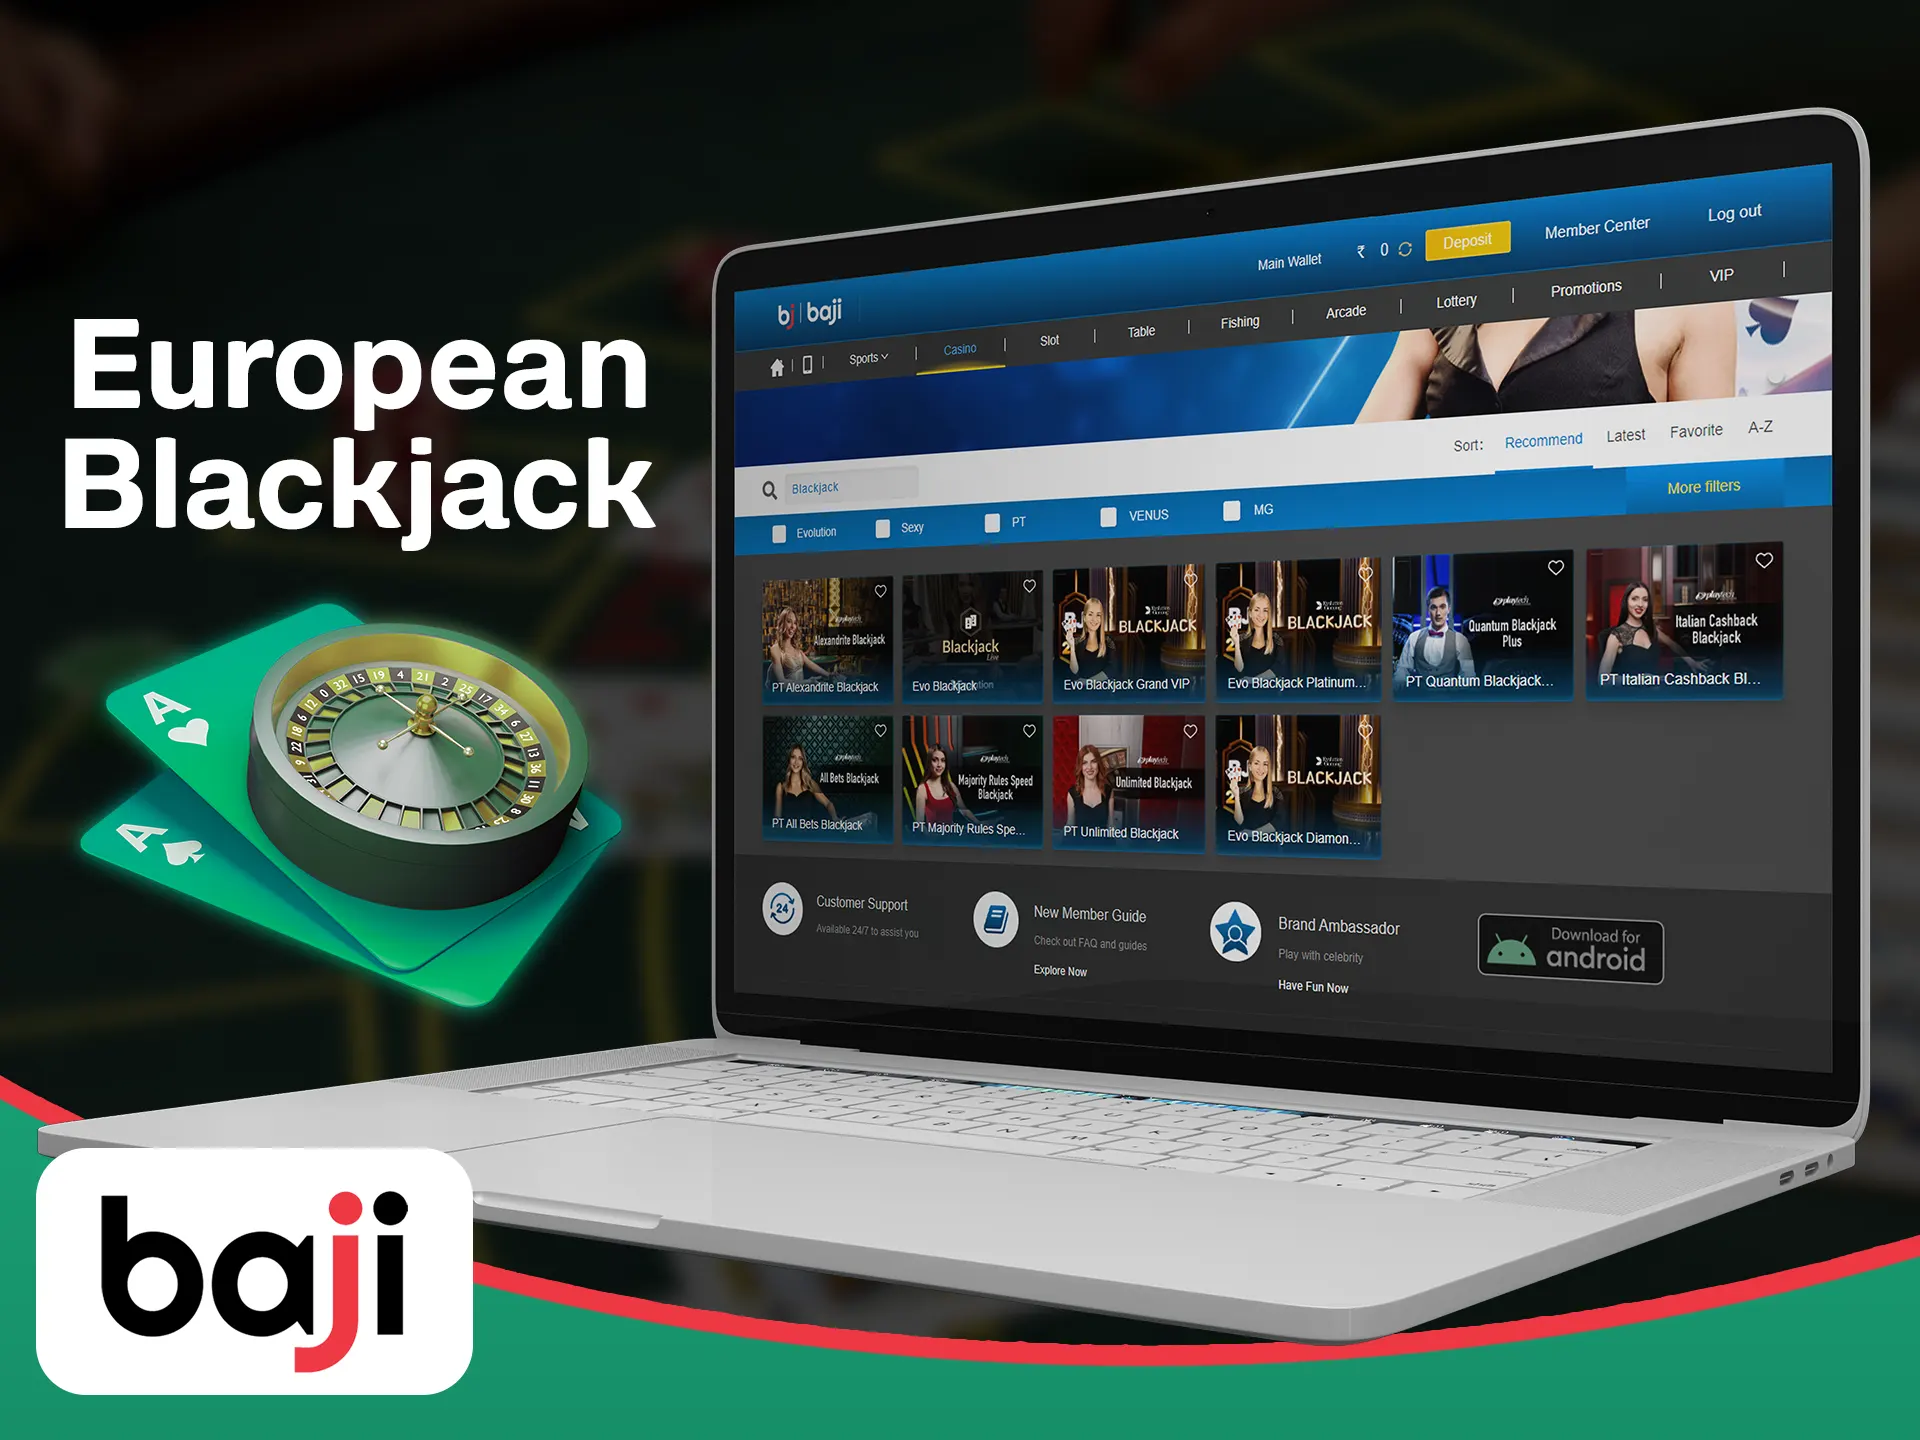 Win money by playing European type of blackjack at the Baji.